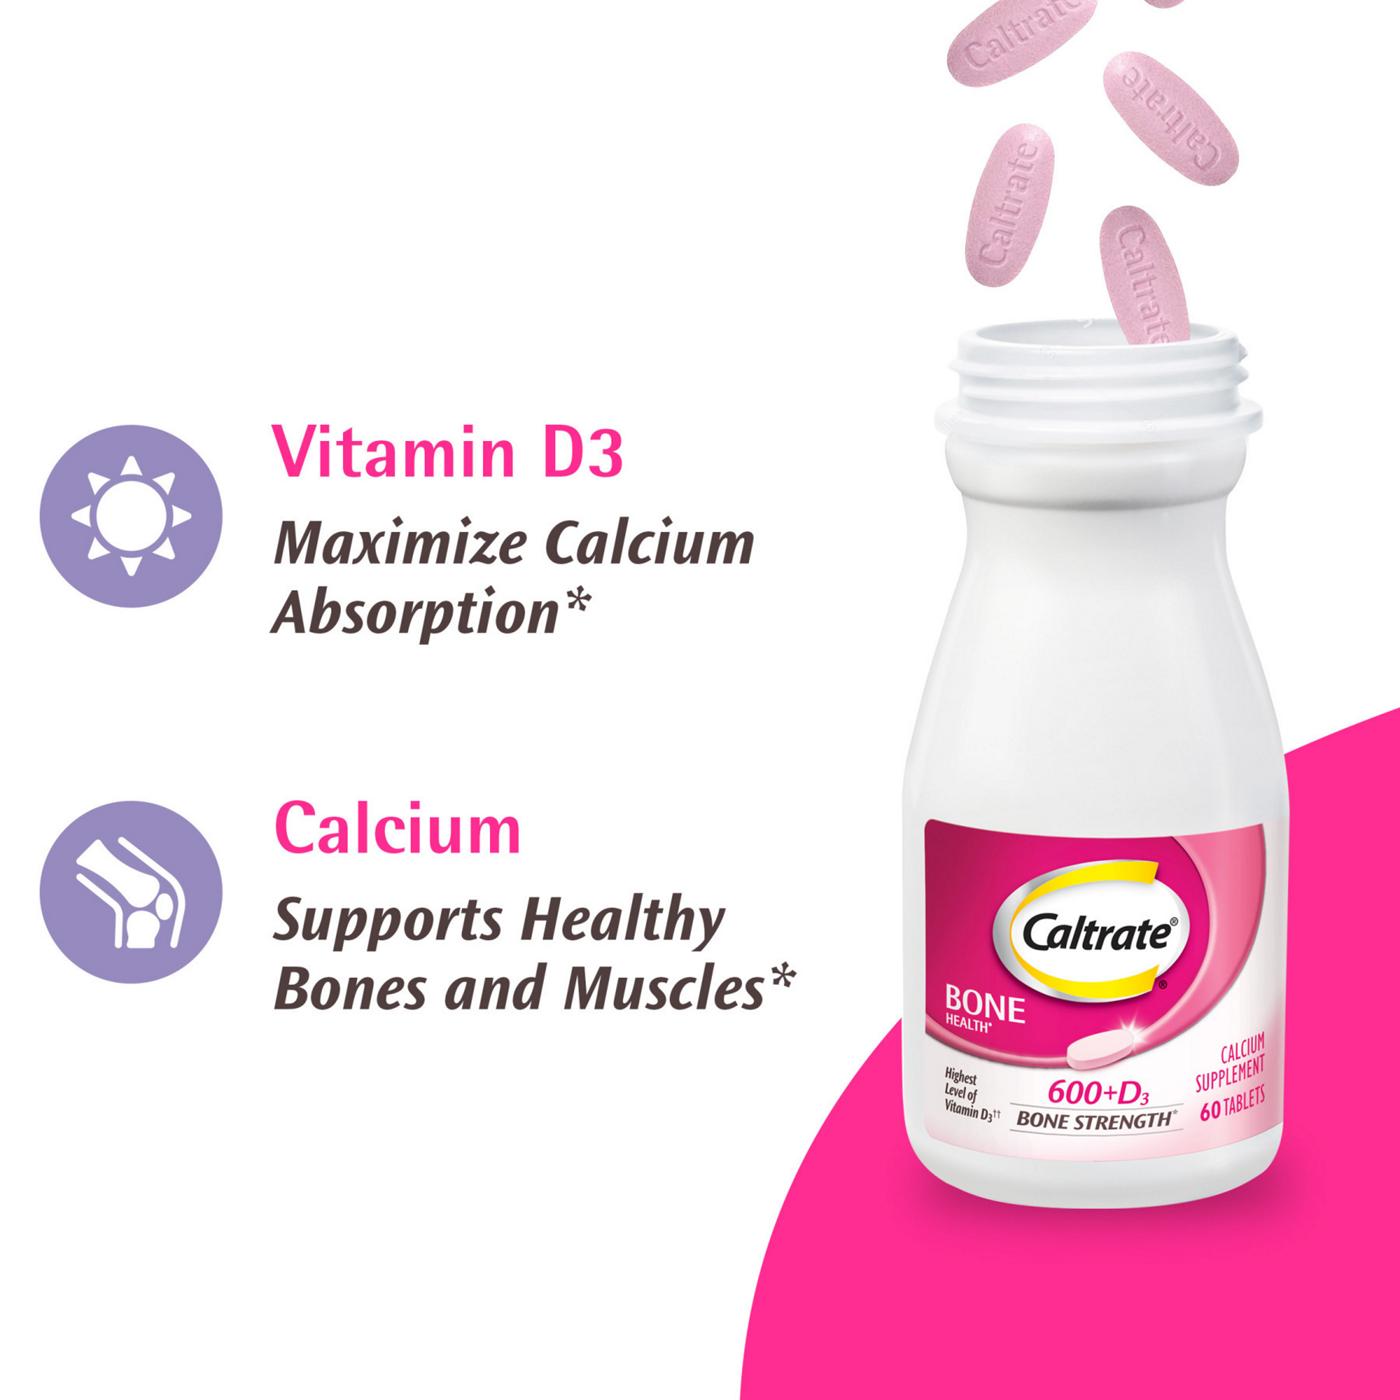 Caltrate 600+D3 Bone Strength Calcium Supplement Tablets; image 3 of 5